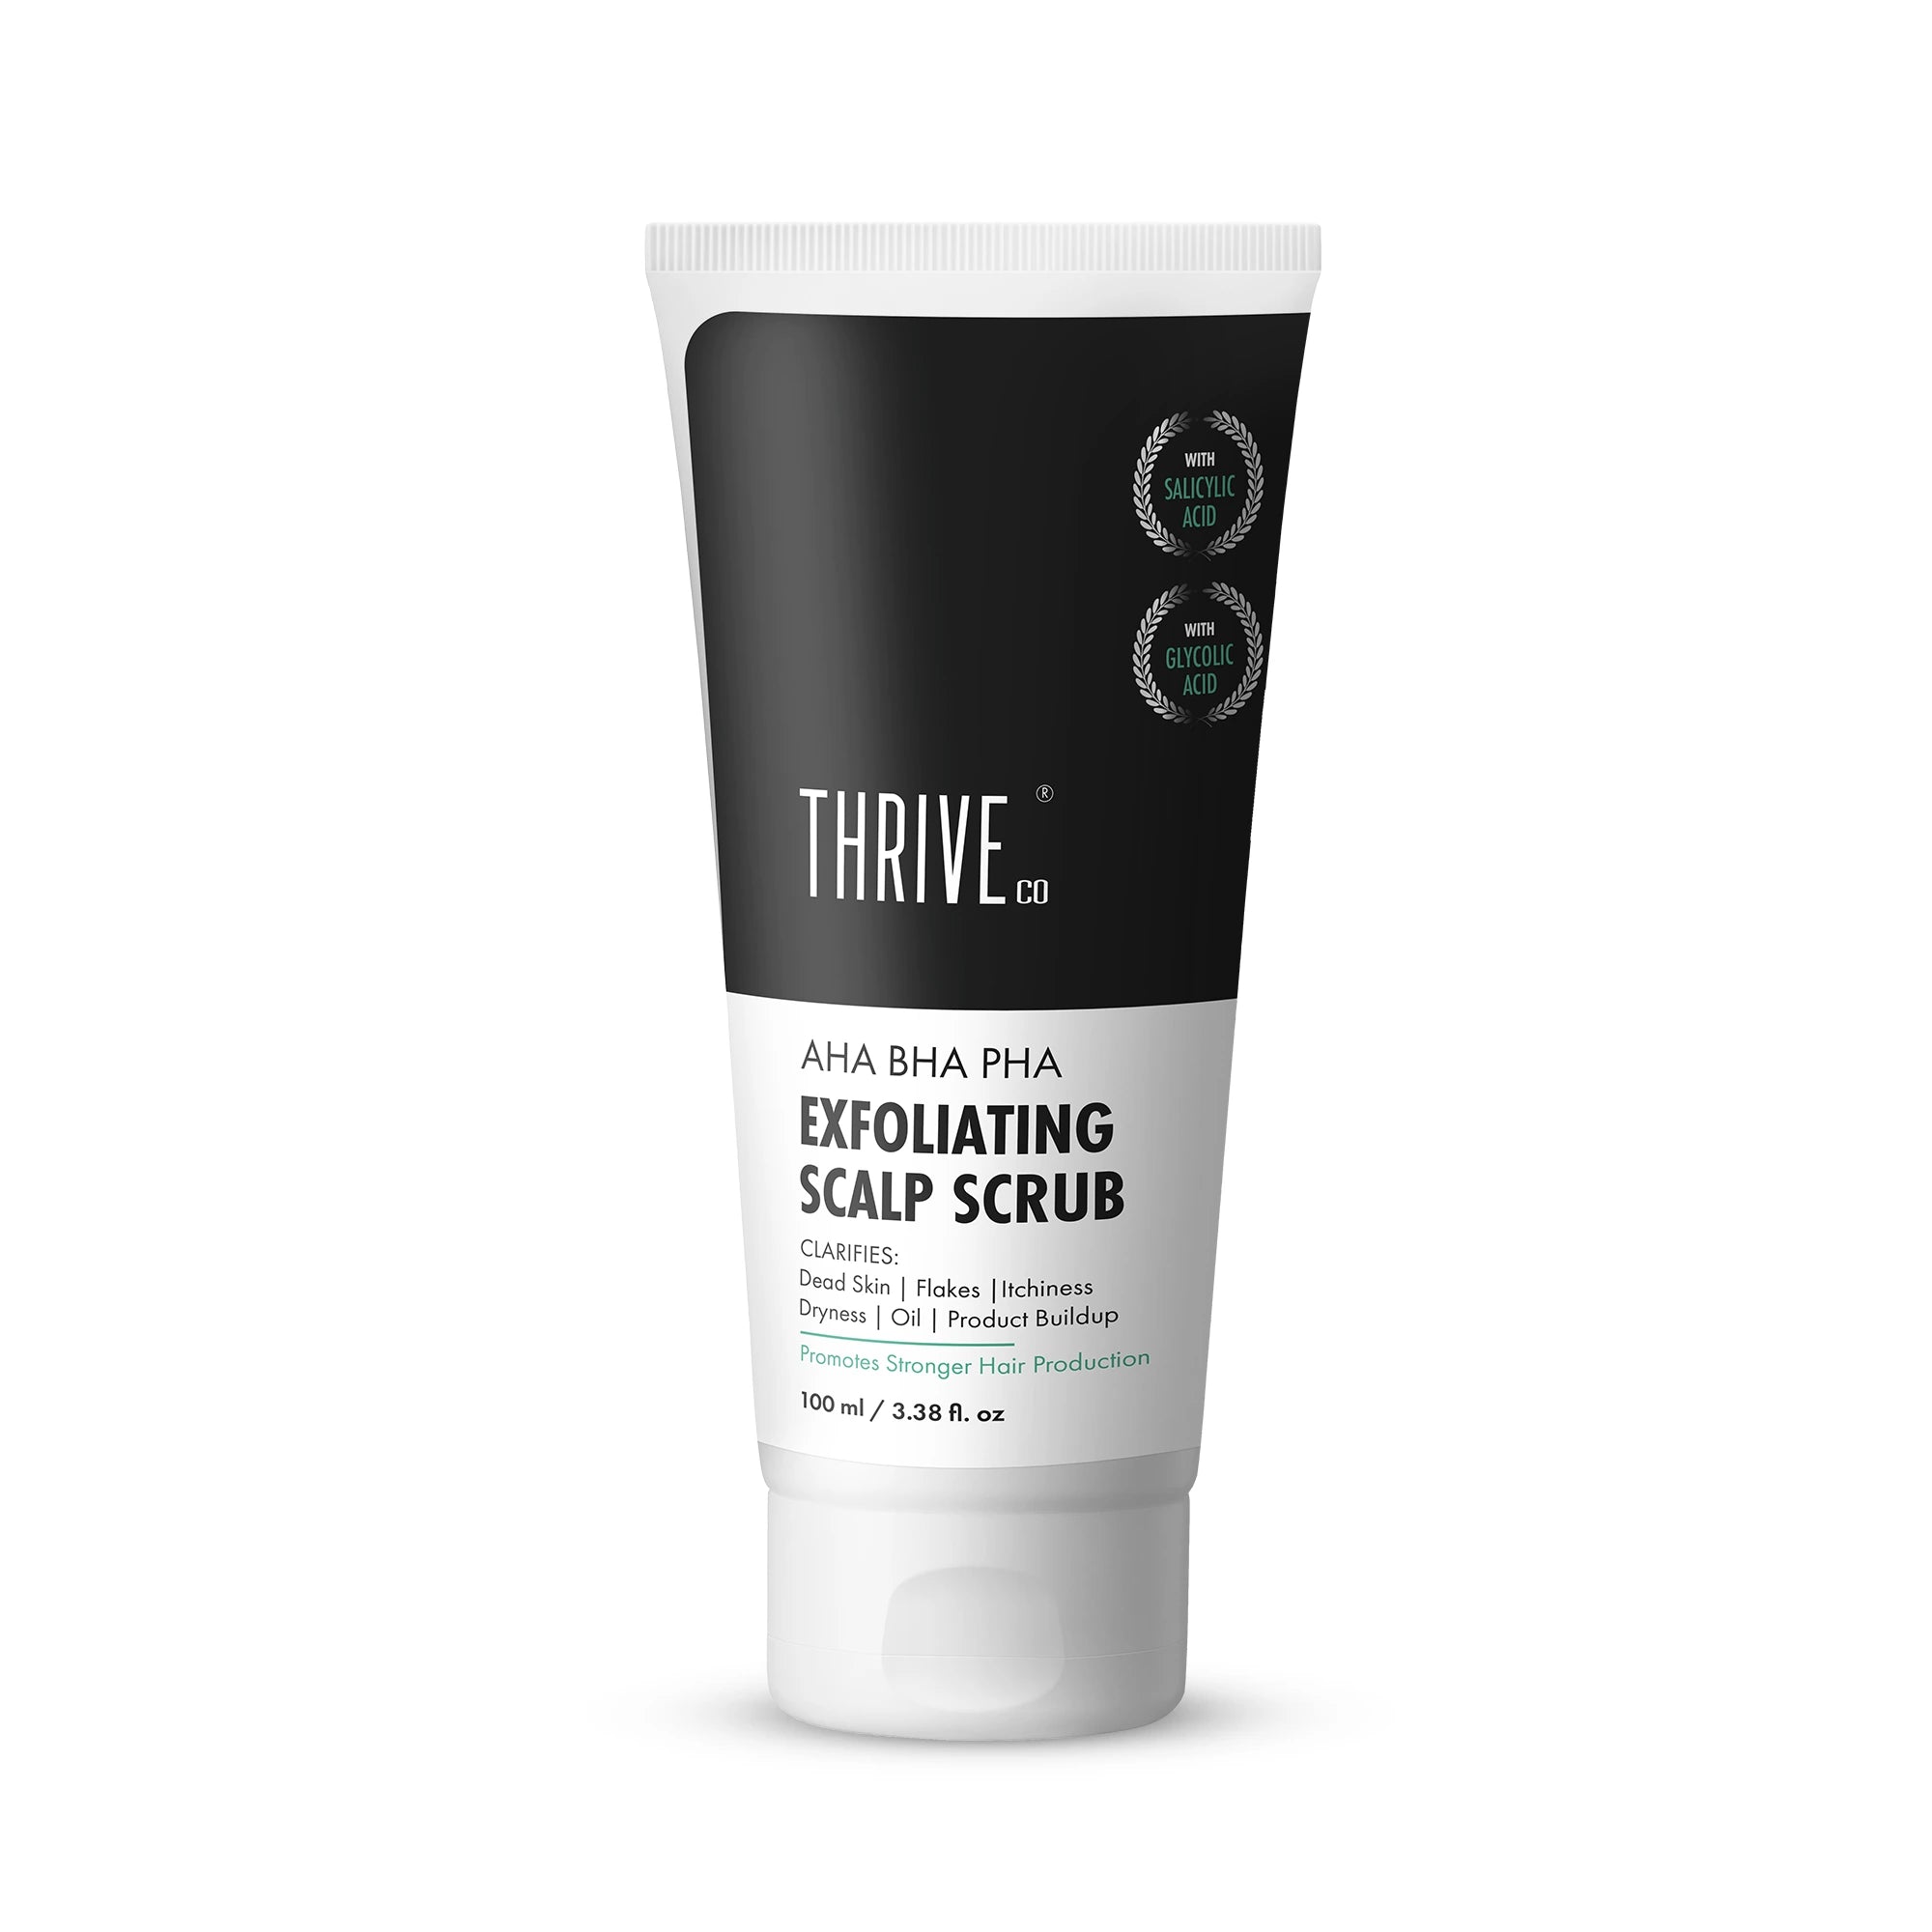 thriveco exfoliating scalp scrub for flaky, itchy & dry scalp